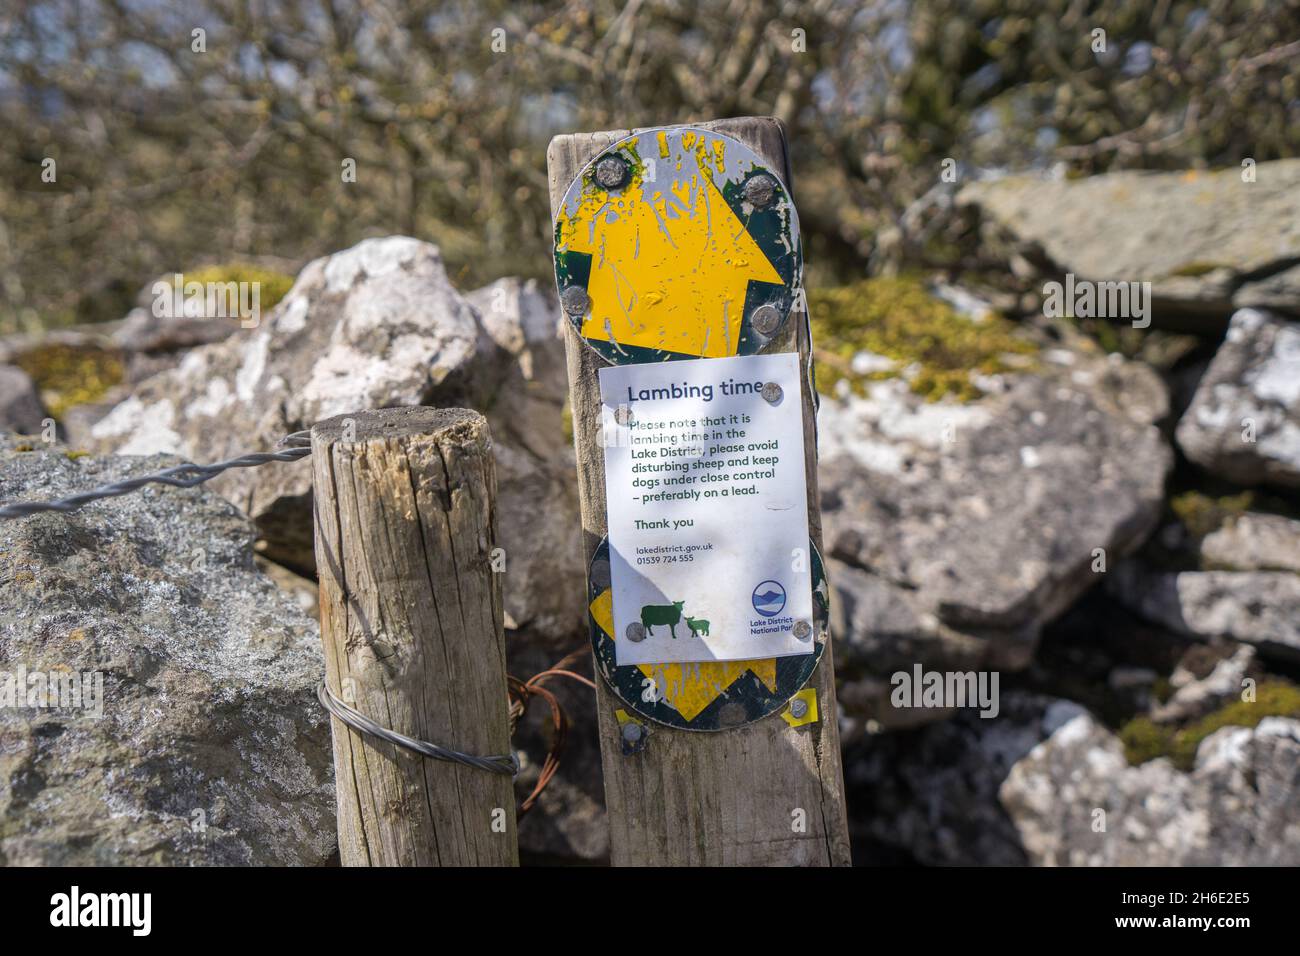 Warning notices during the lambing season on a cumbrian fell Stock Photo